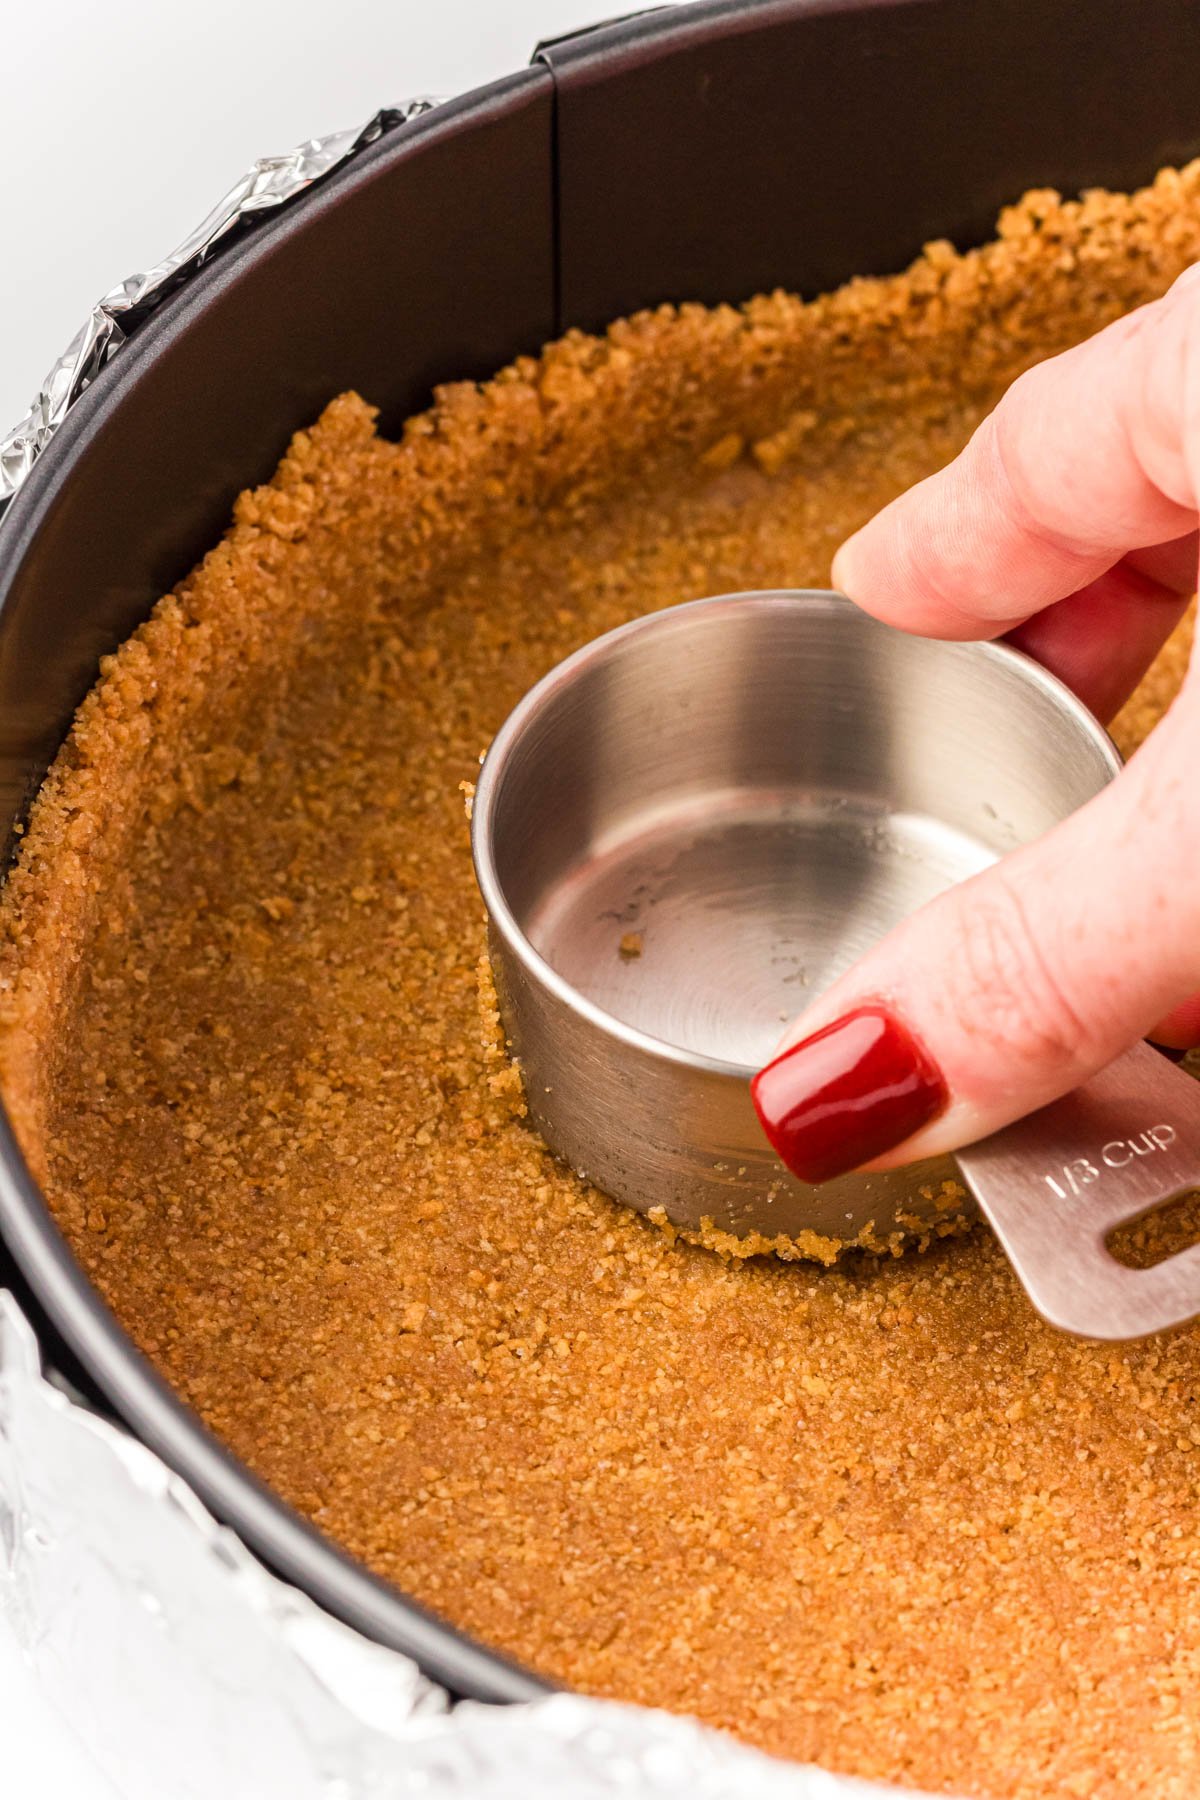 Graham cracker crust being pressed down into the bottom of a springform pan.